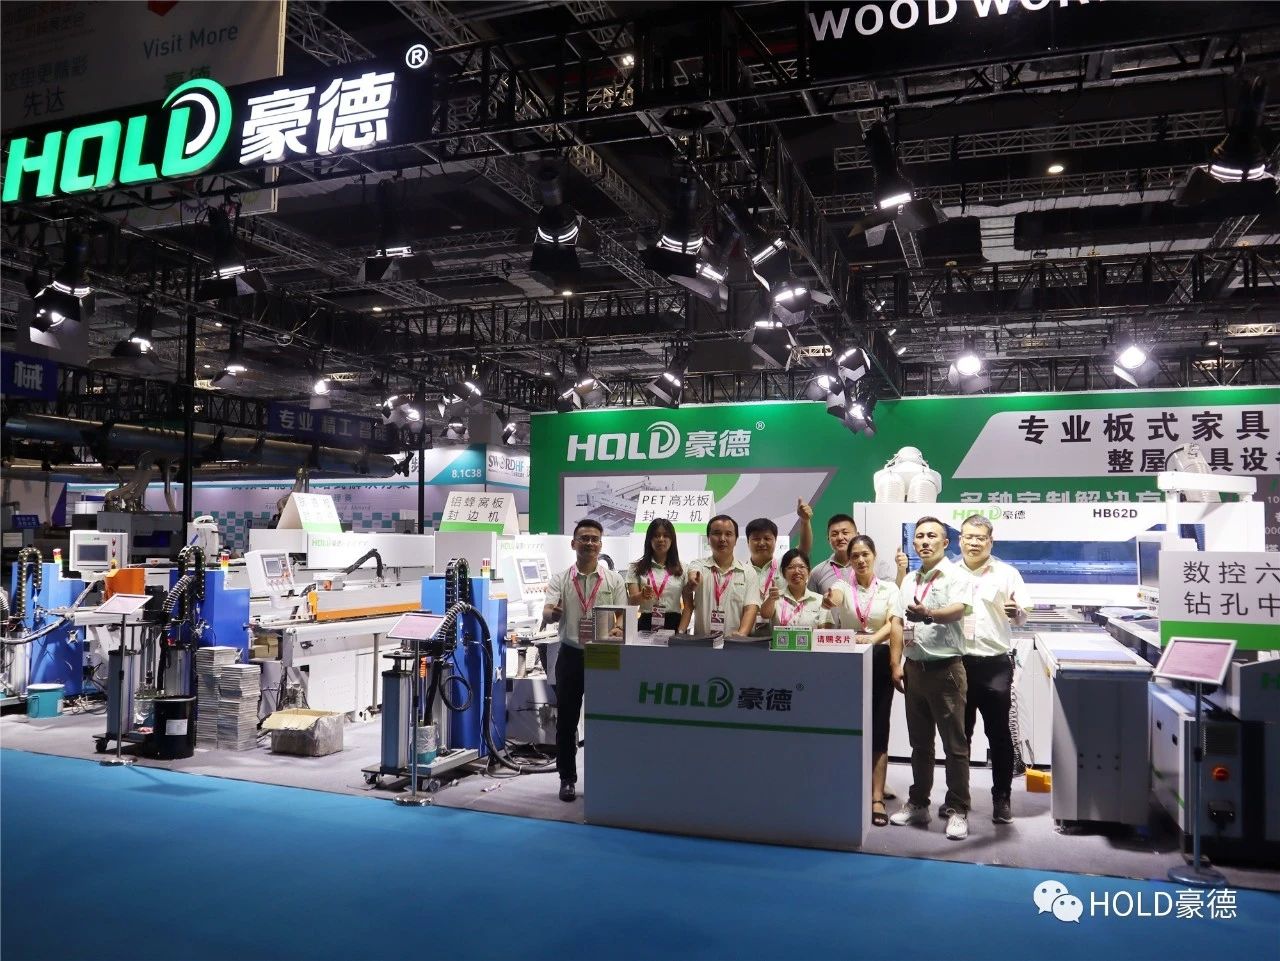 Live record of HOLD CNC Shanghai Exhibition